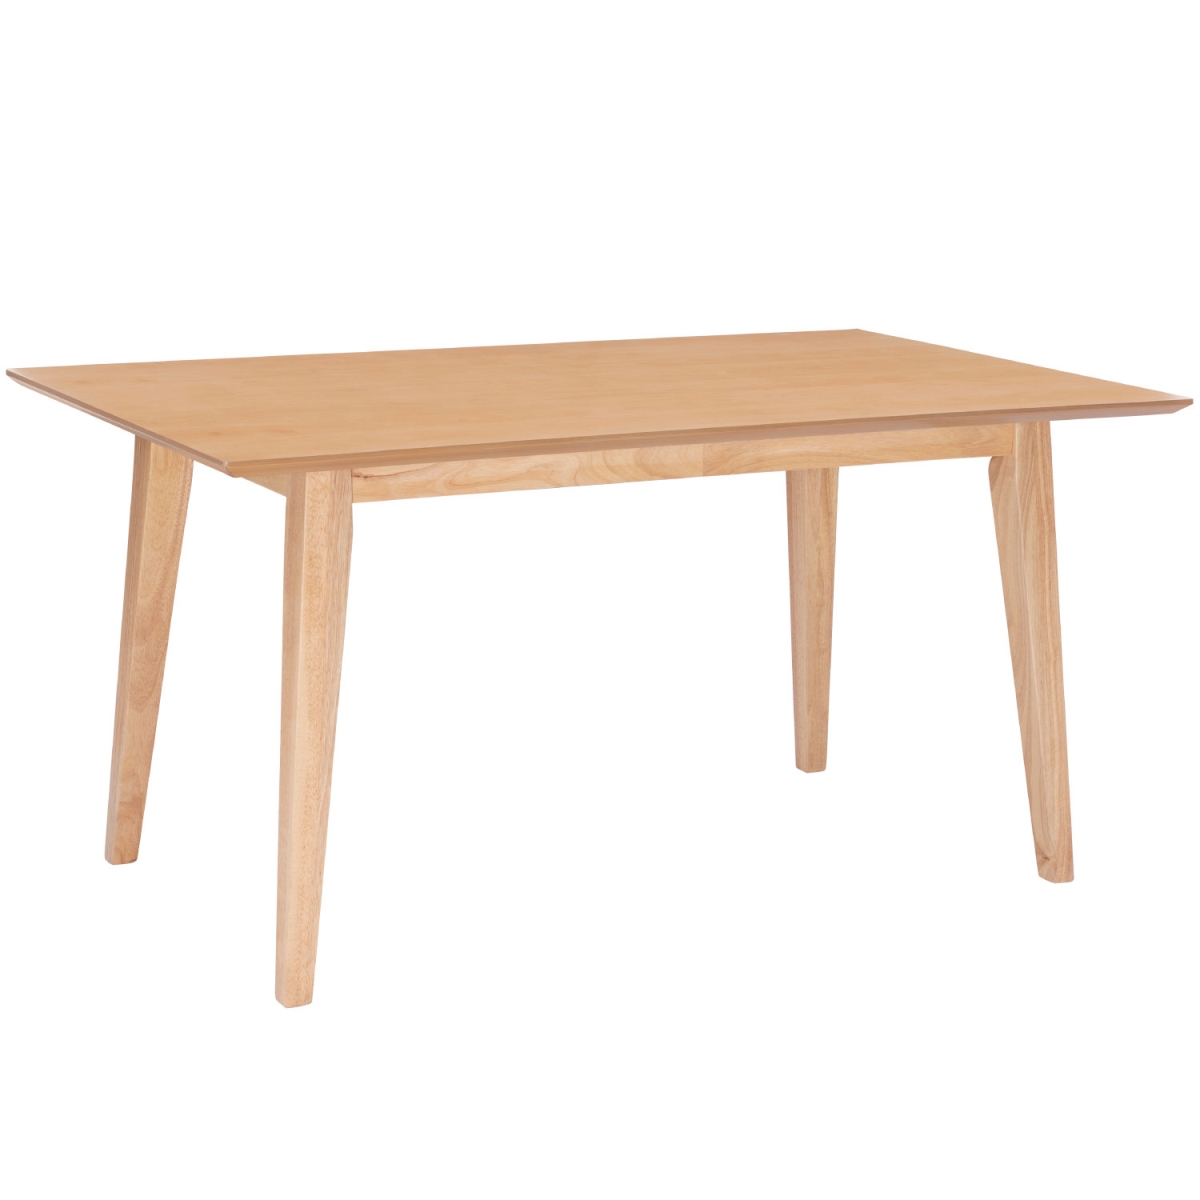 D1276d19dt Cadence Dining Table, Natural